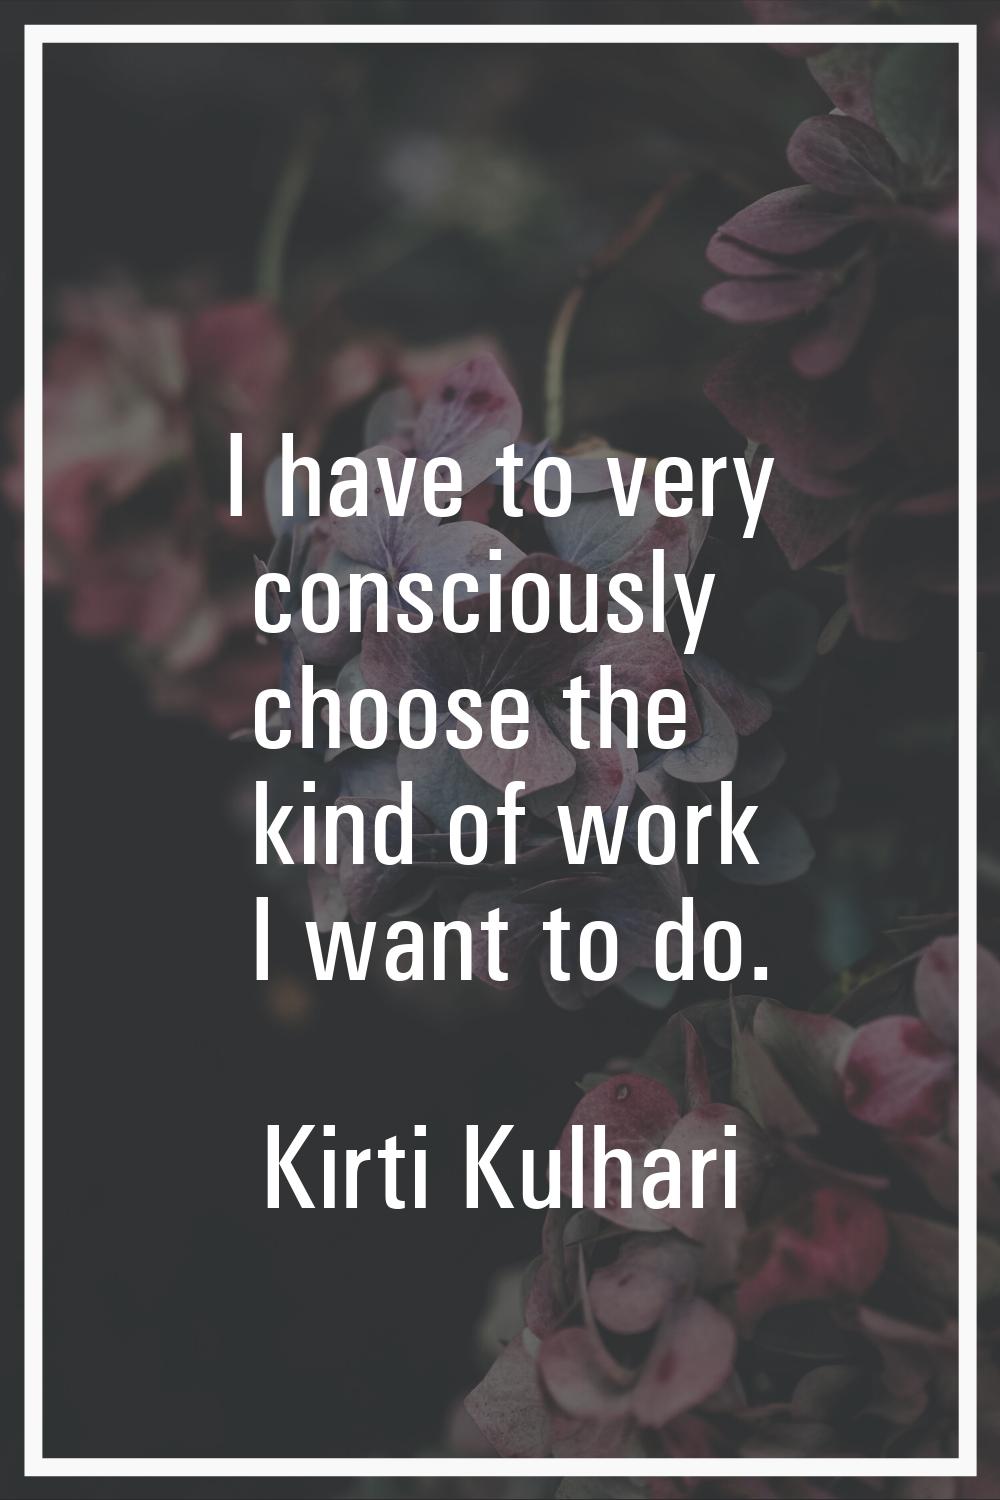 I have to very consciously choose the kind of work I want to do.